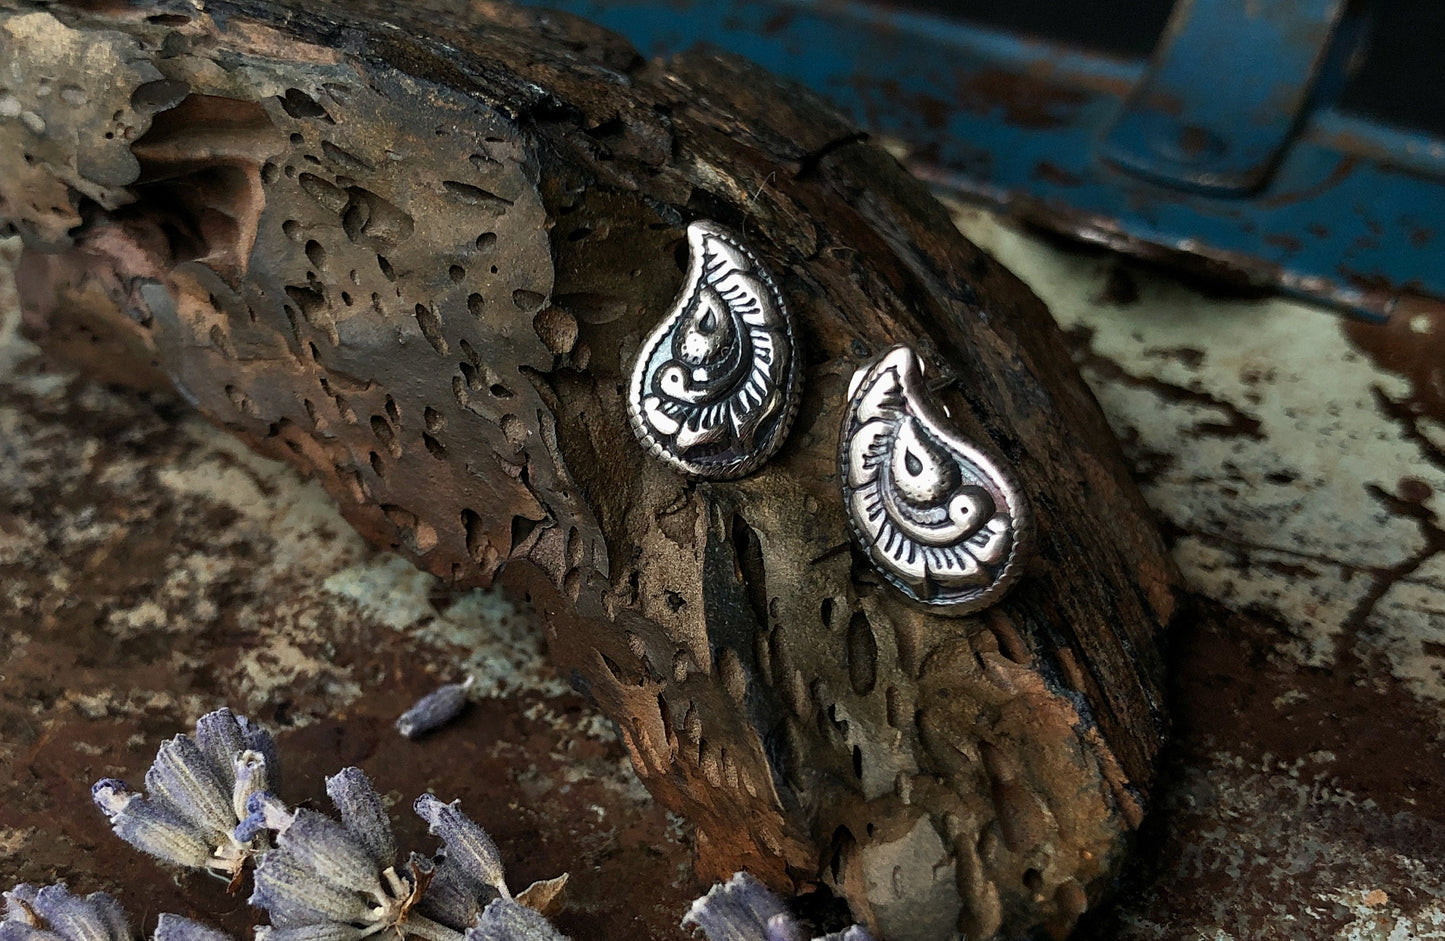 Sterling Silver Peacock Feather Earrings